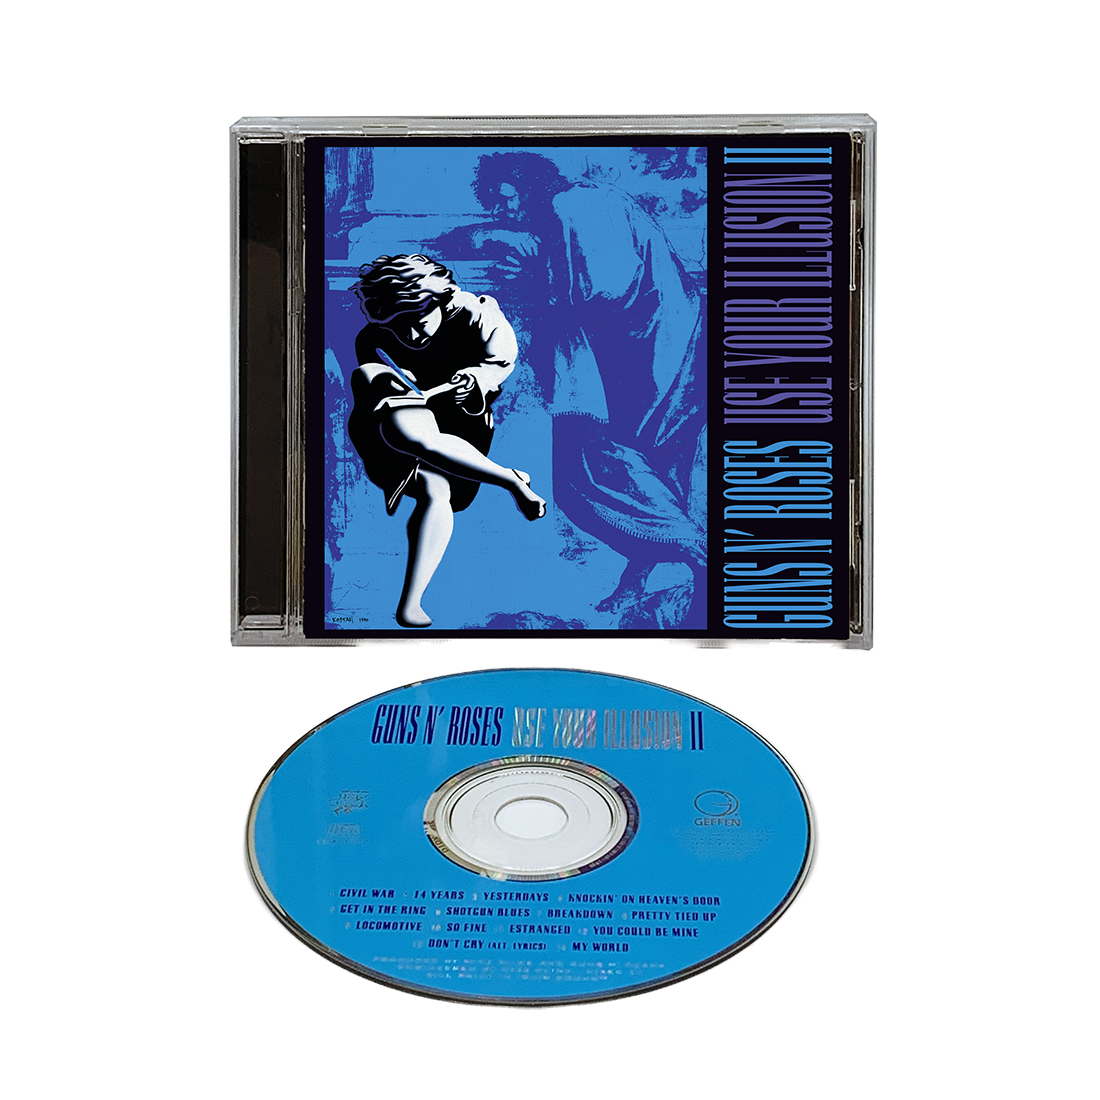 Guns N Roses - Use Your Illusion II: CD